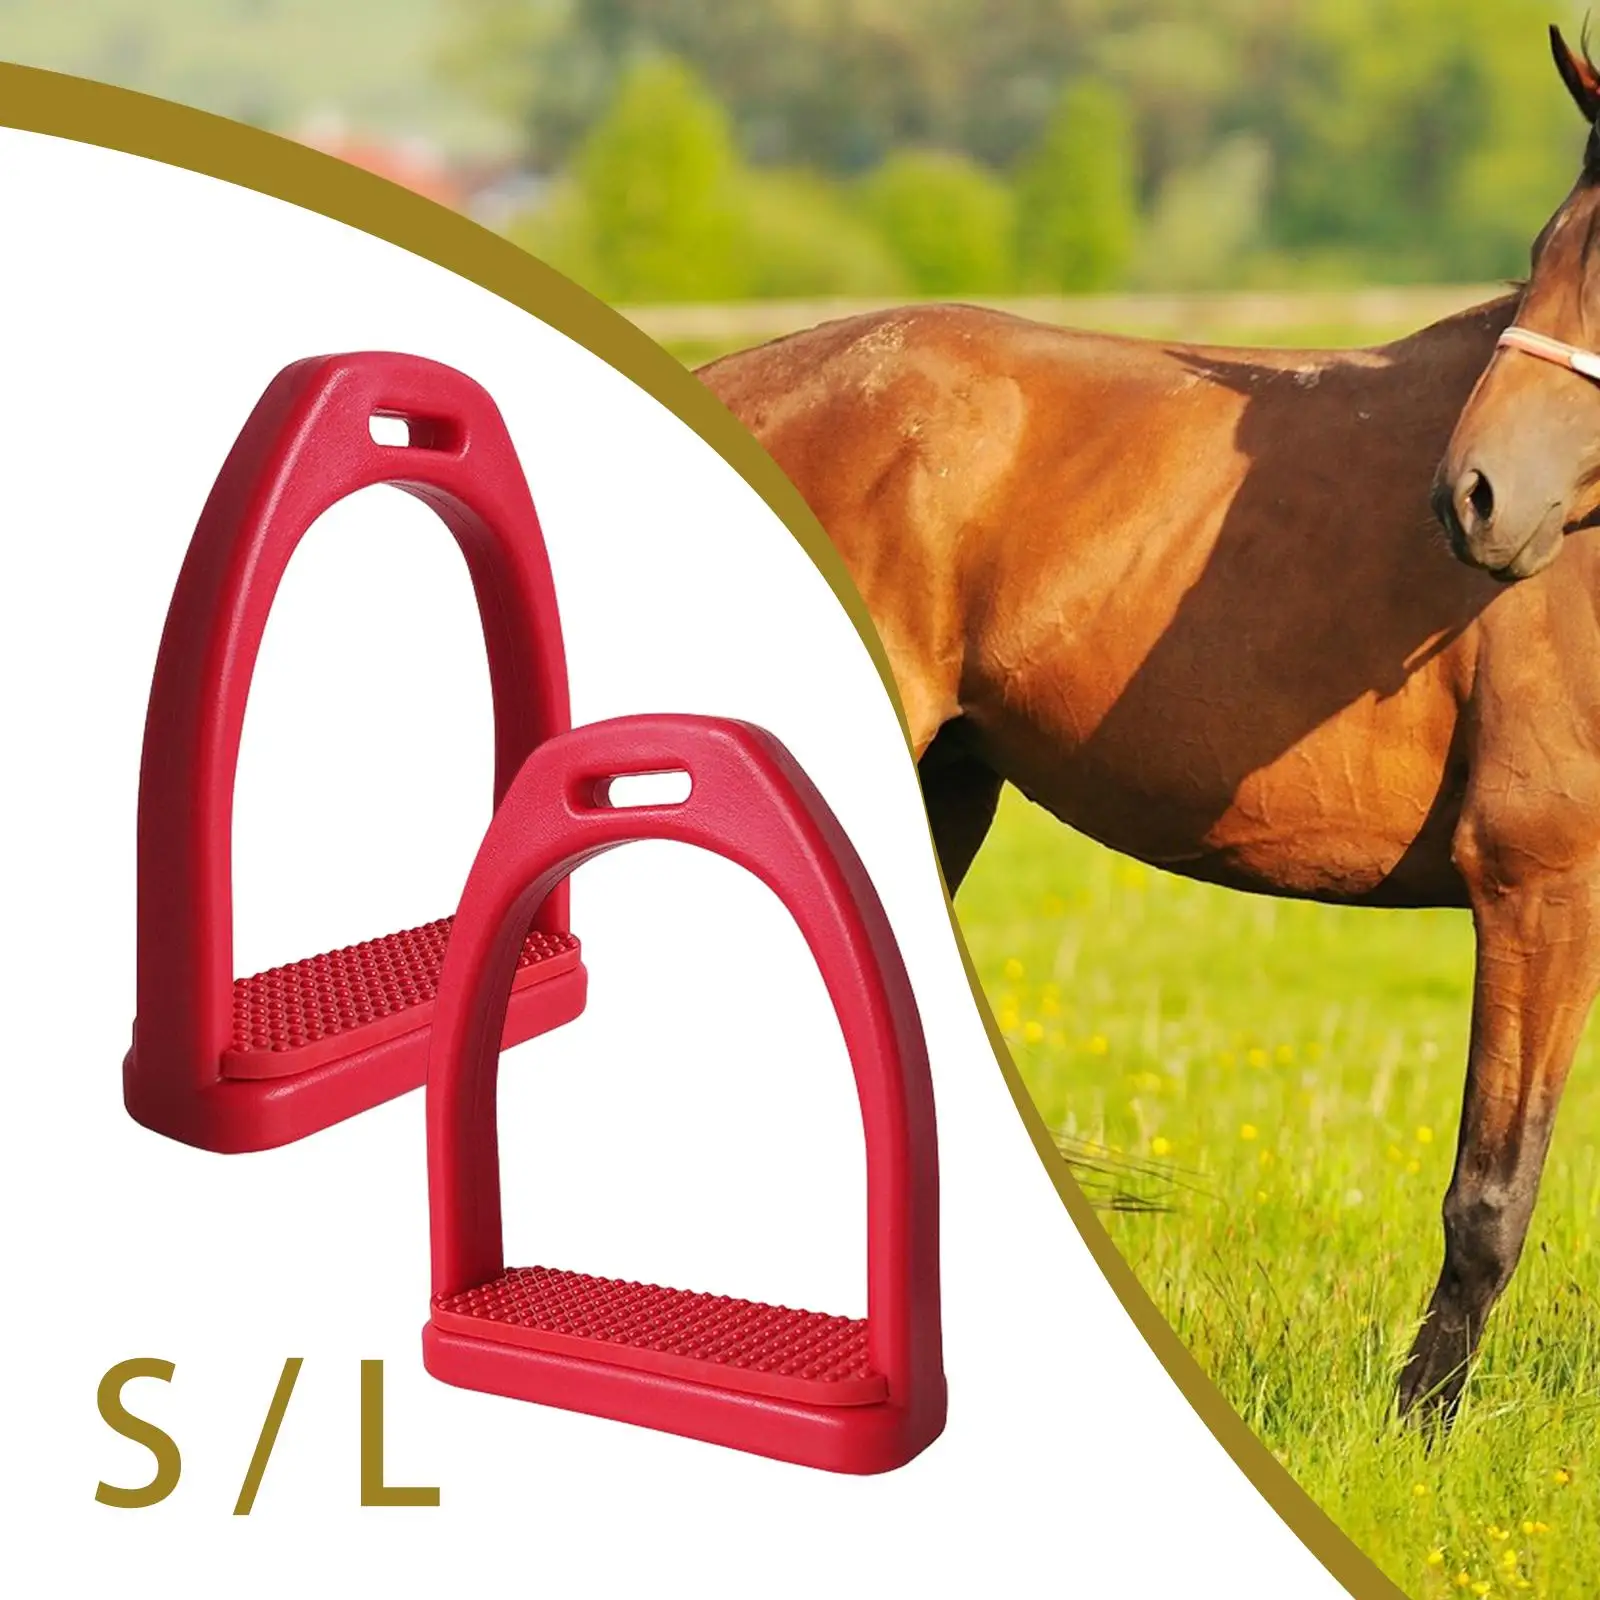 2Pcs Horse Riding Stirrups Equestrian Sports Non Slip High Strength for Safety Horse Riding Outdoor Sports Accessories Childen